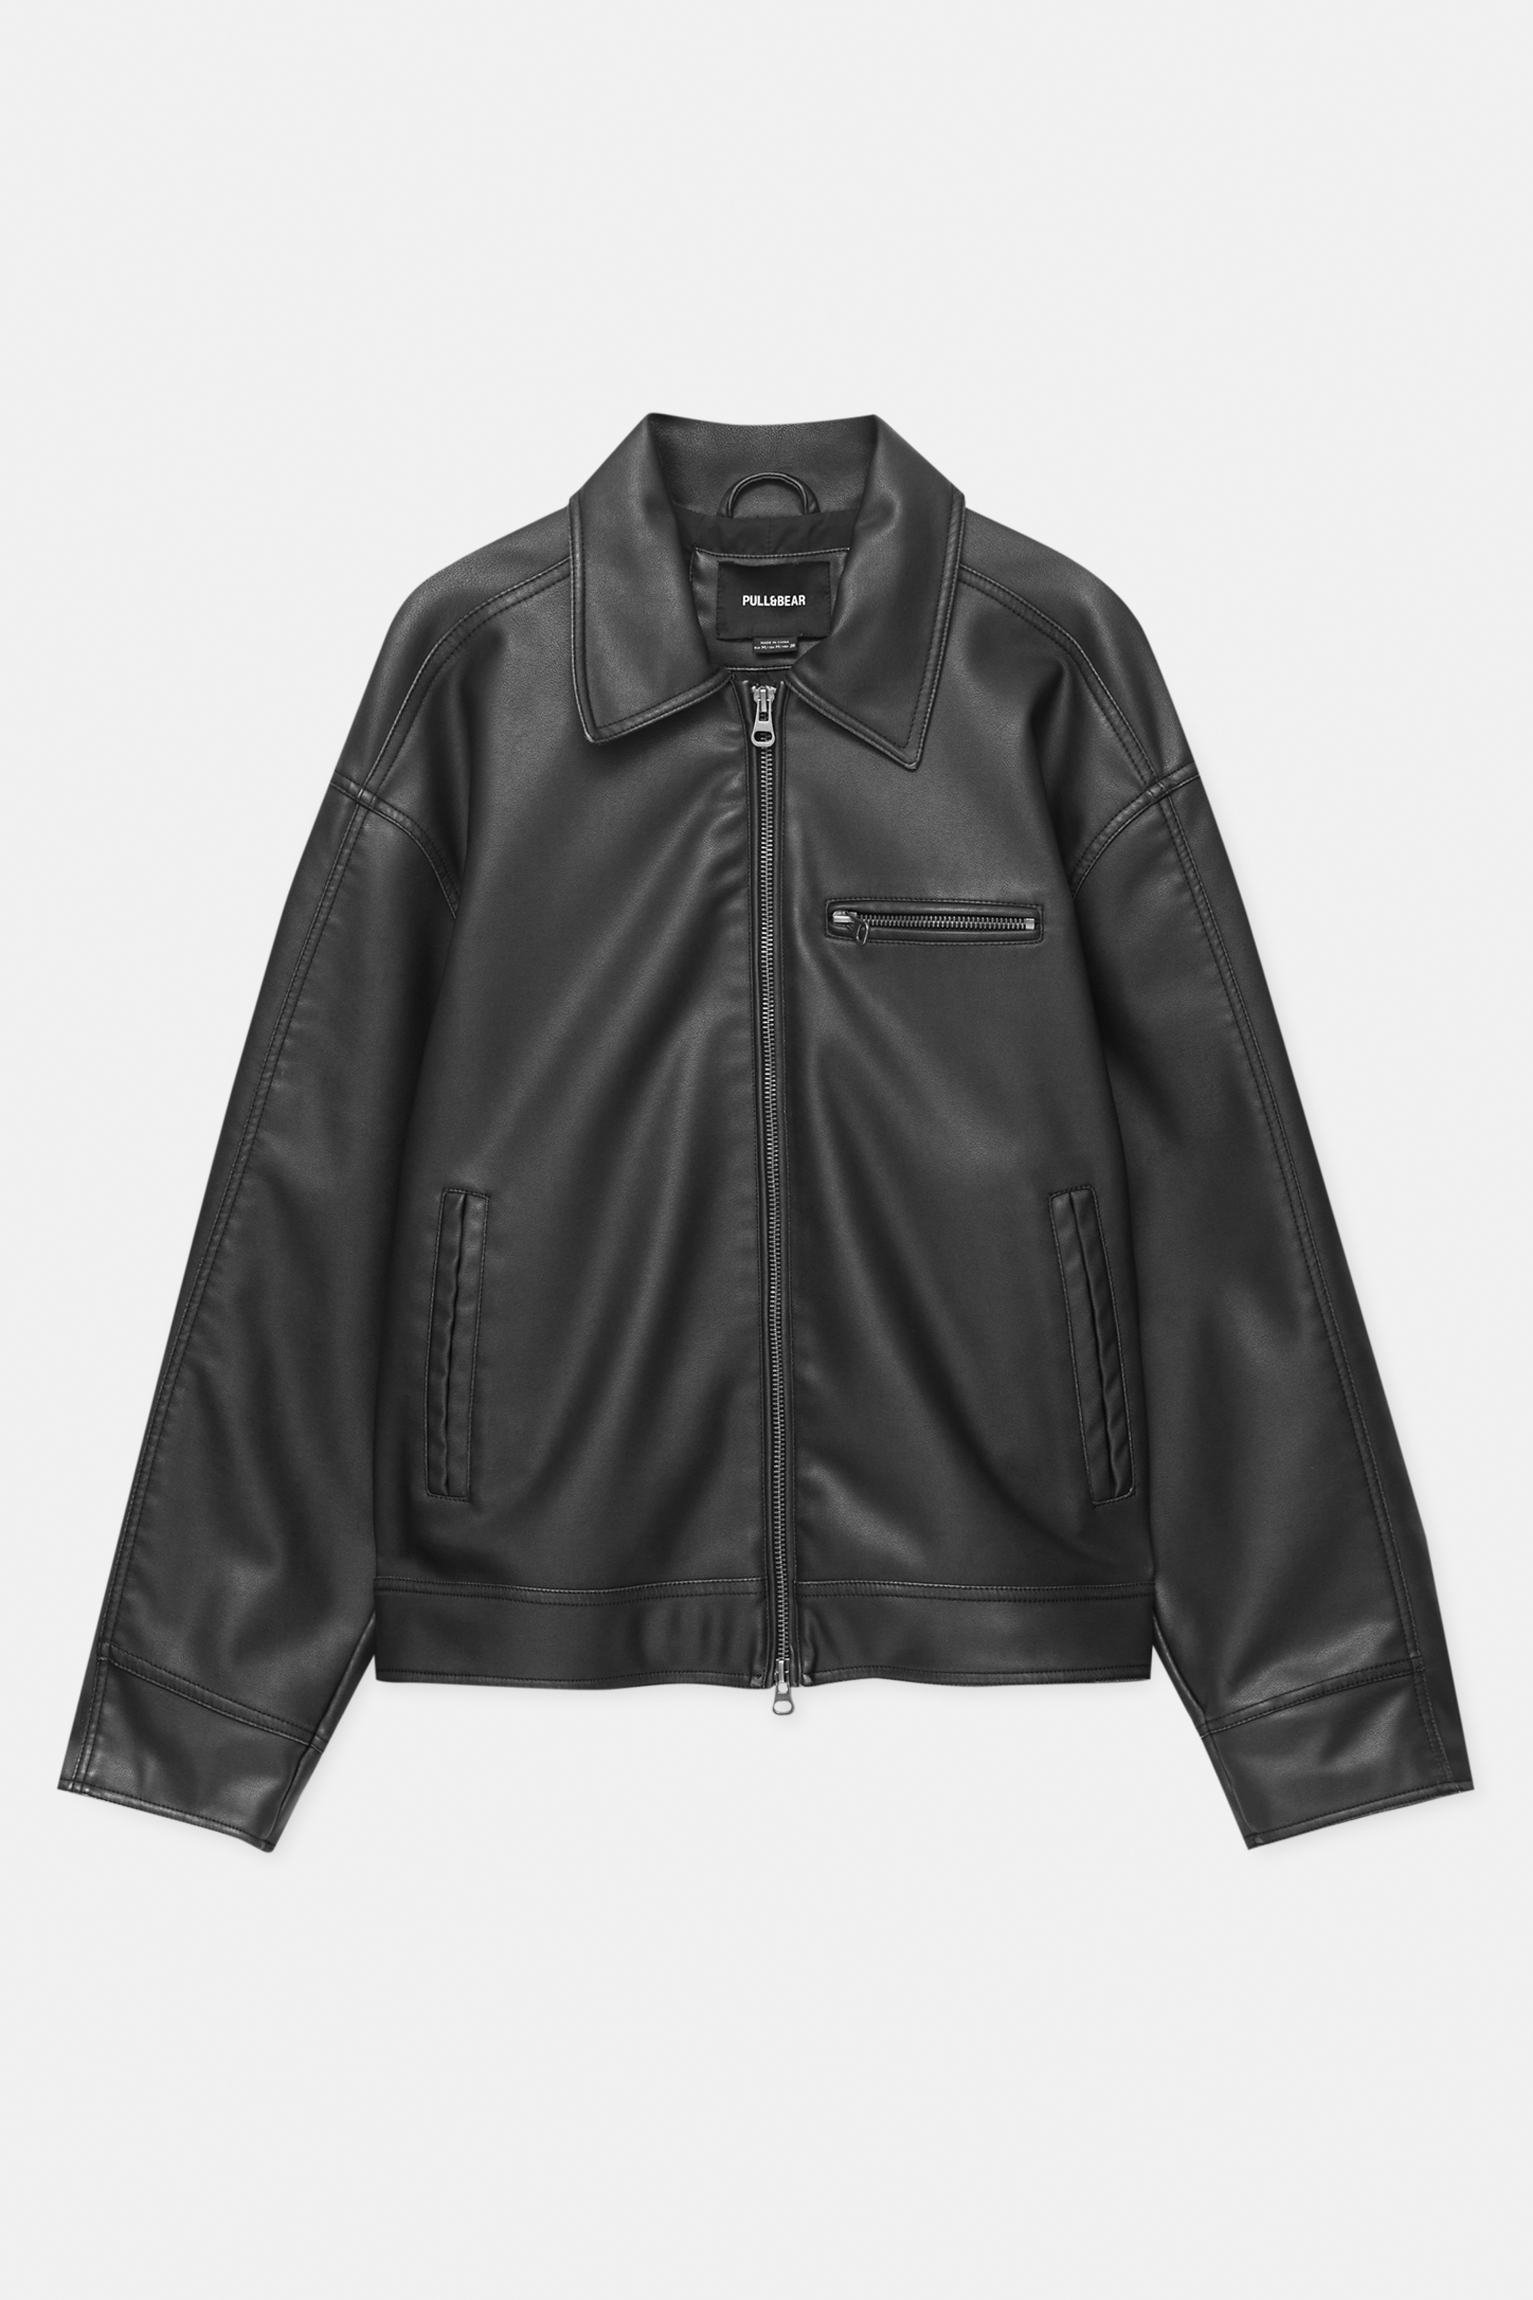 Distressed faux leather jacket - pull&bear